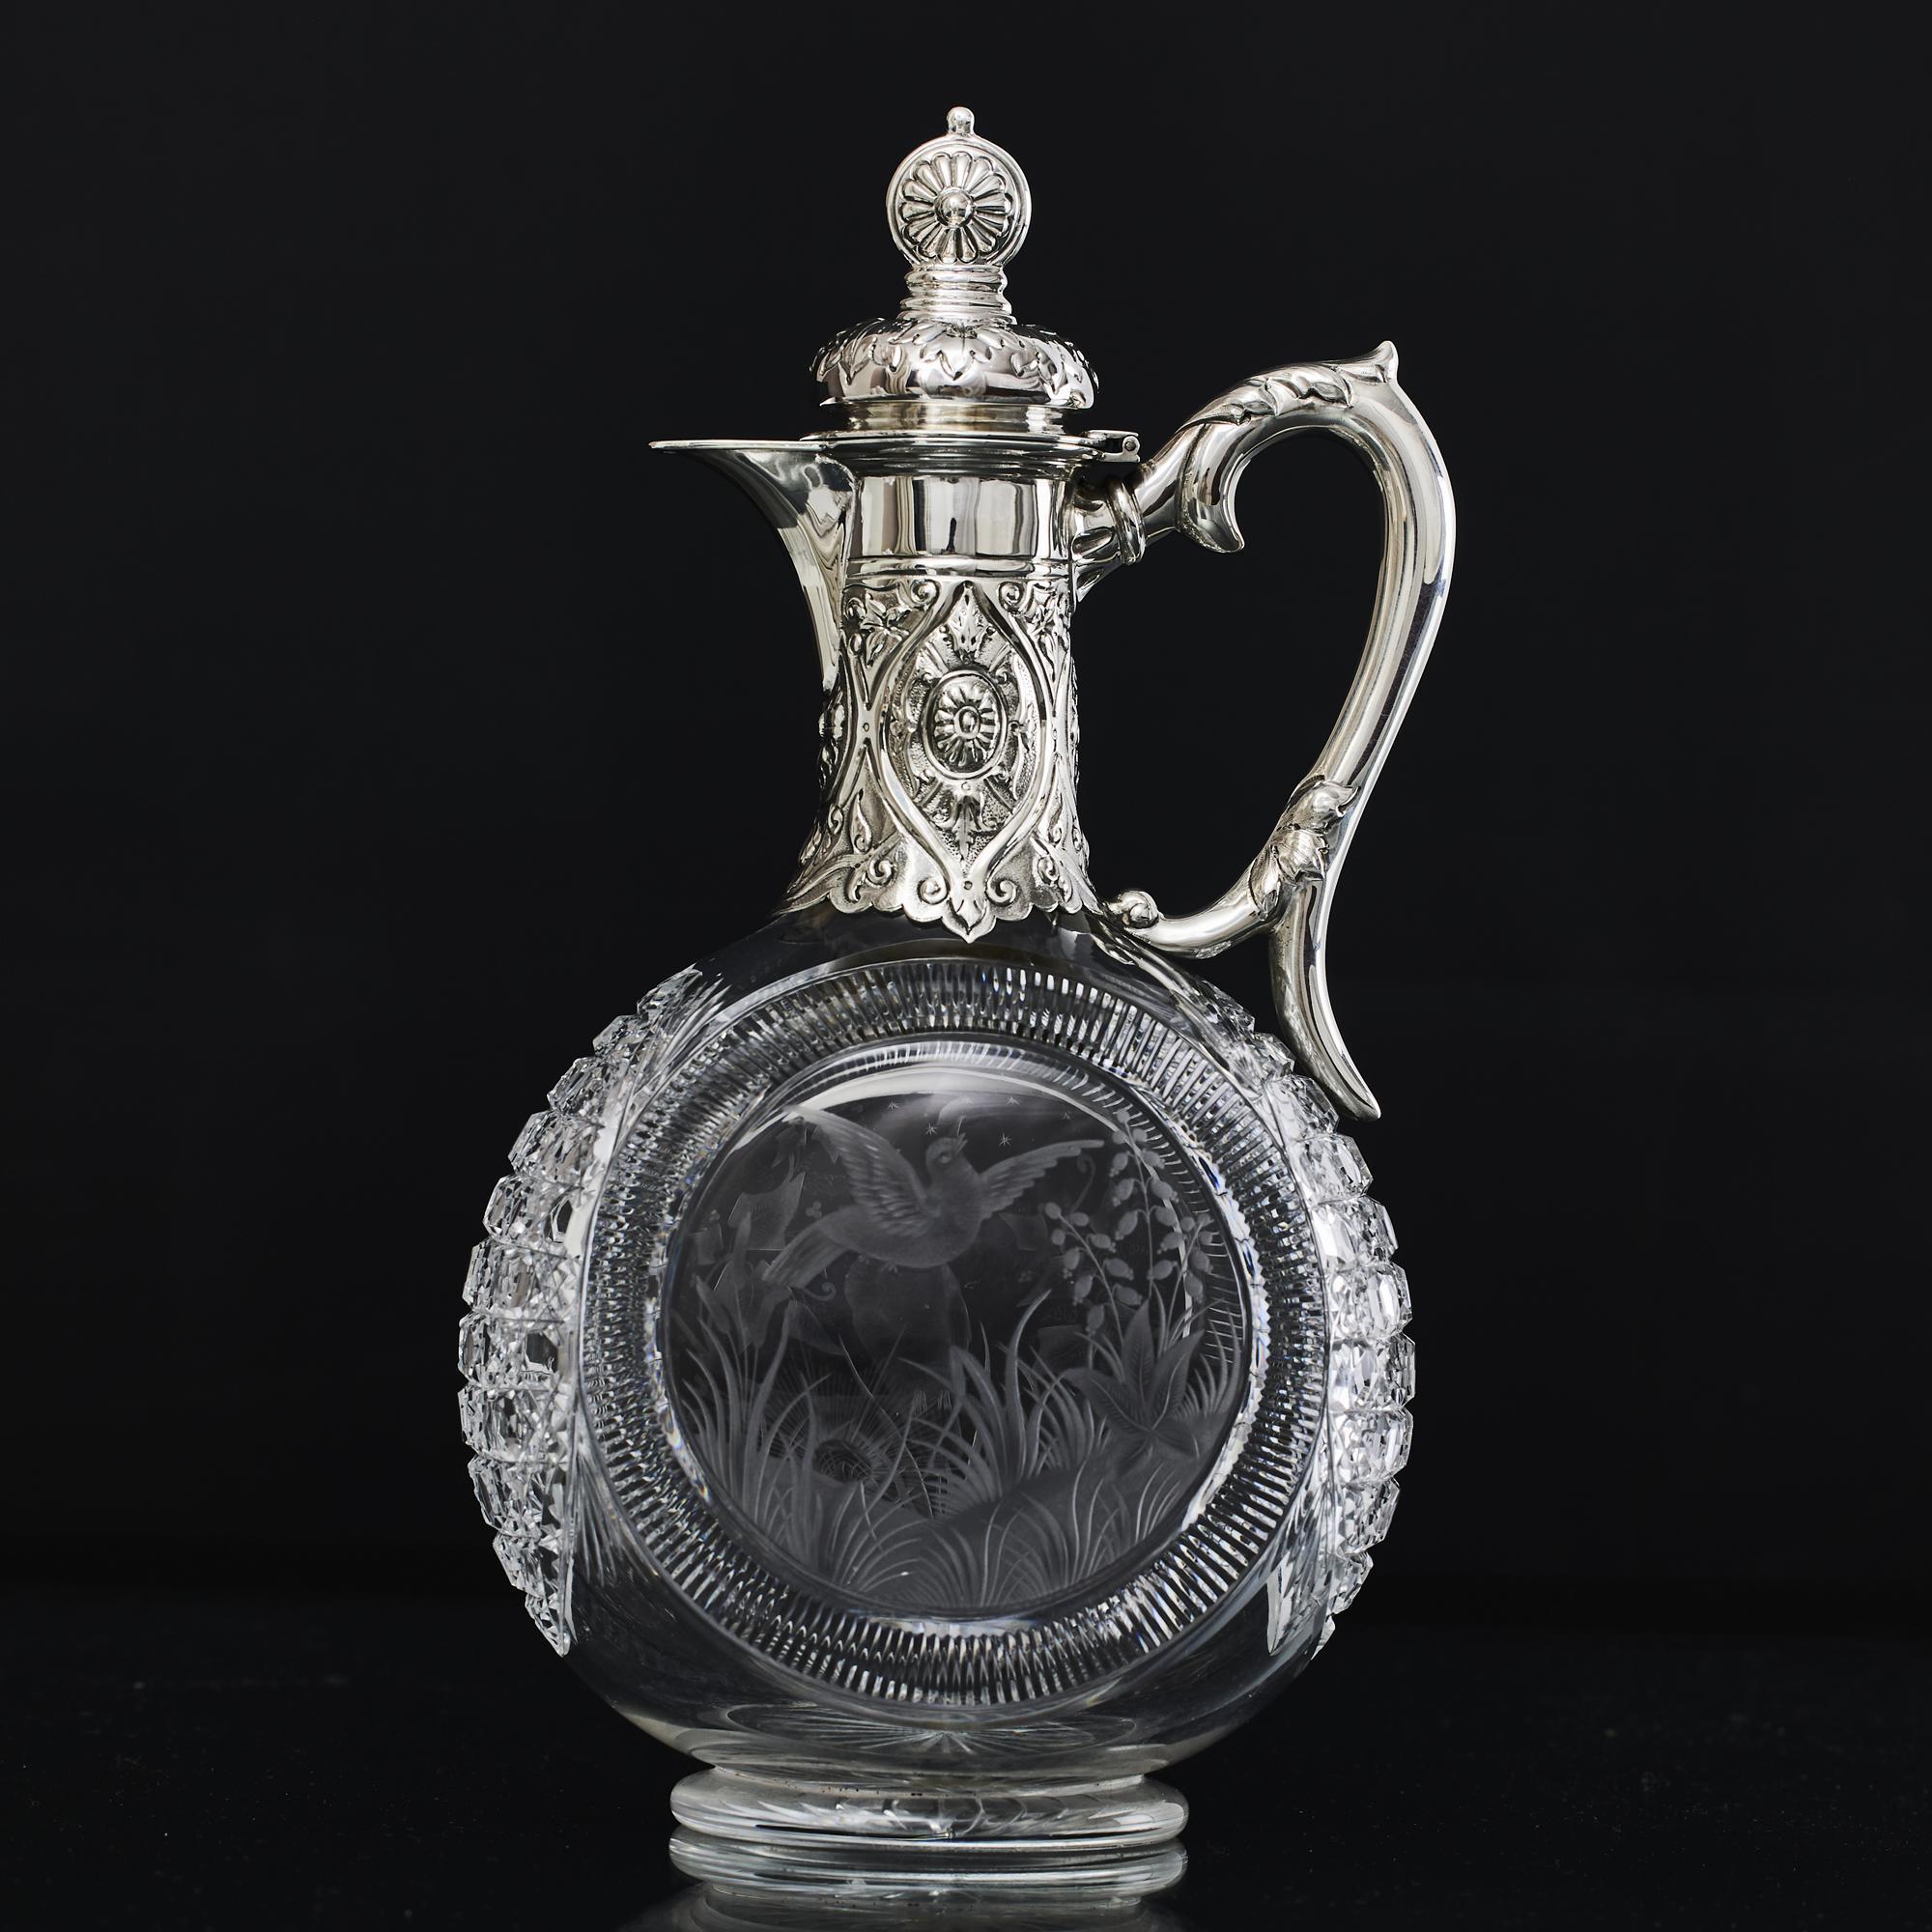 Beautiful, late-Victorian, antique cut glass wine jug with hand chased silver cover and mounts. The glass body is skilfully decorated with hand engraved panels incorporating an owl and a flying dove against a countryside setting. The glass body